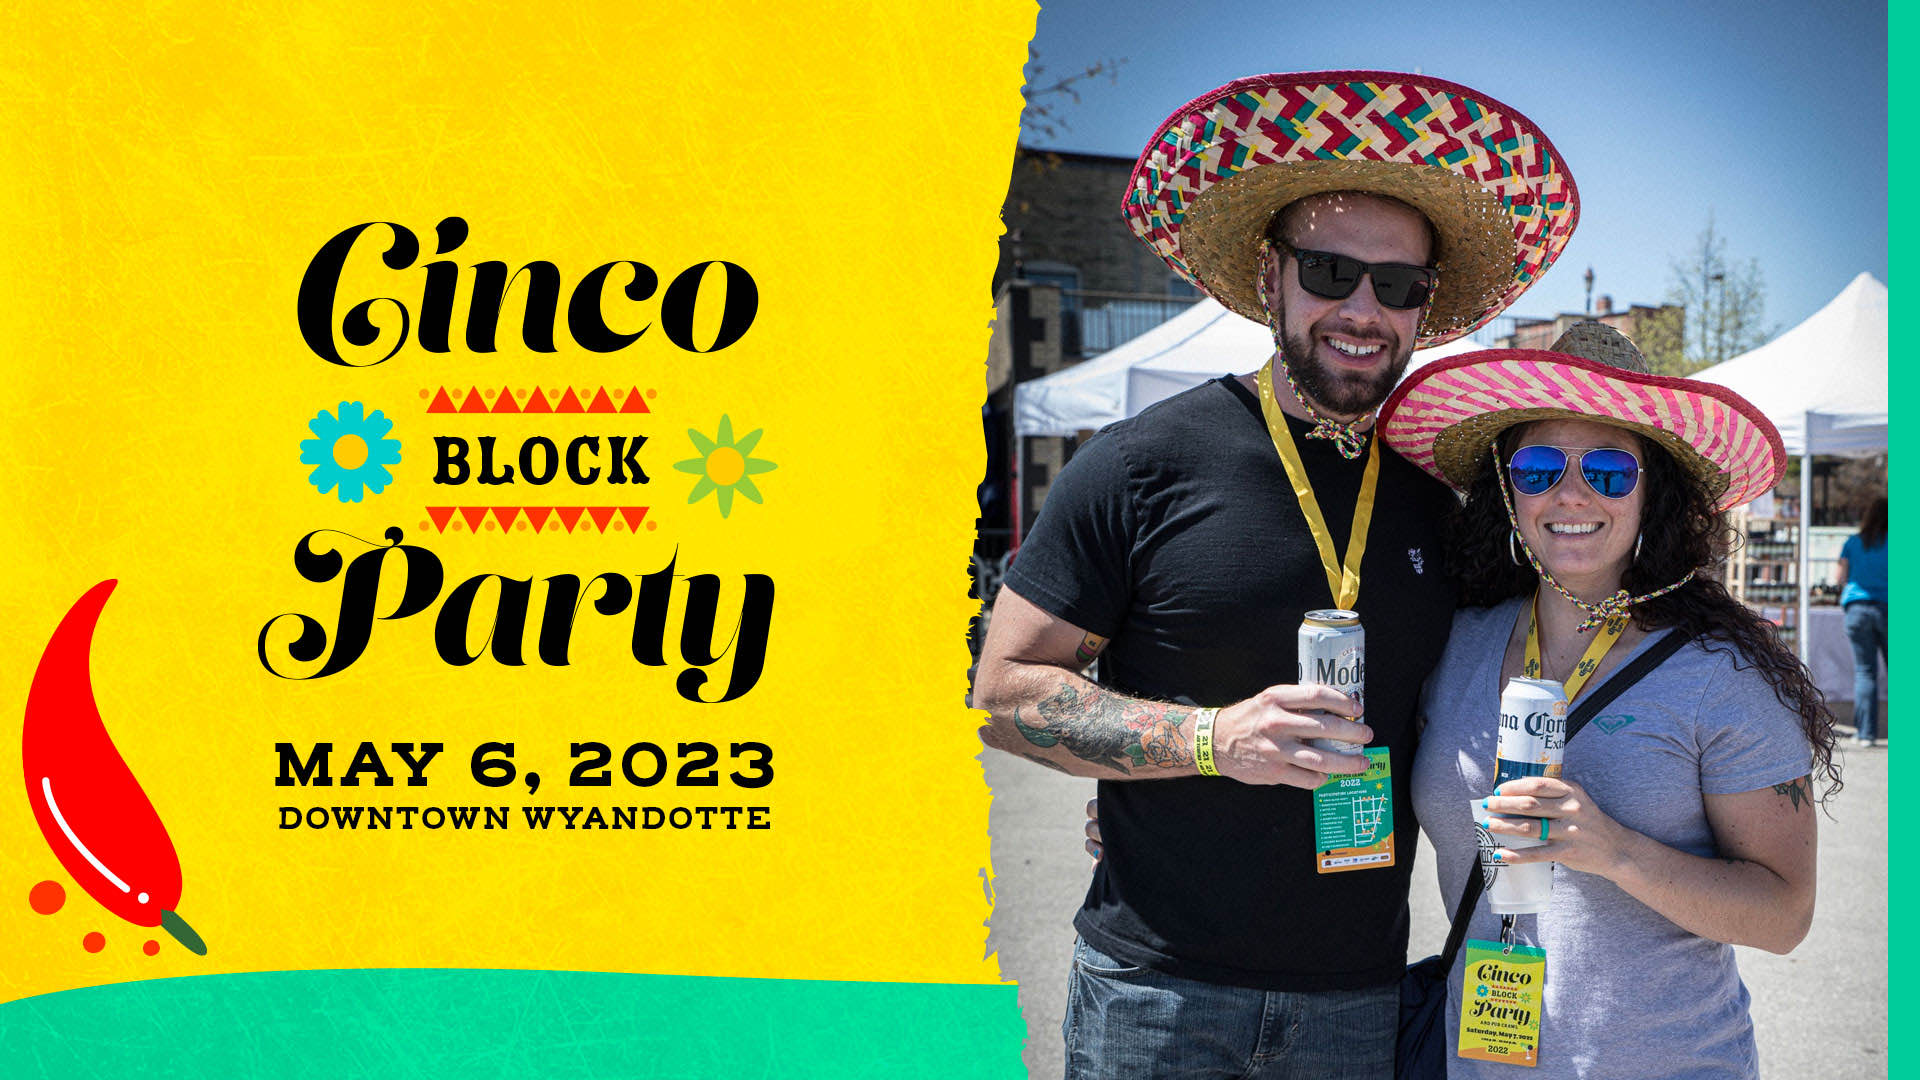 Cinco Block Party May 6, 2023 Downtown Wyandotte with image of couple wearing sombreros and holding beer